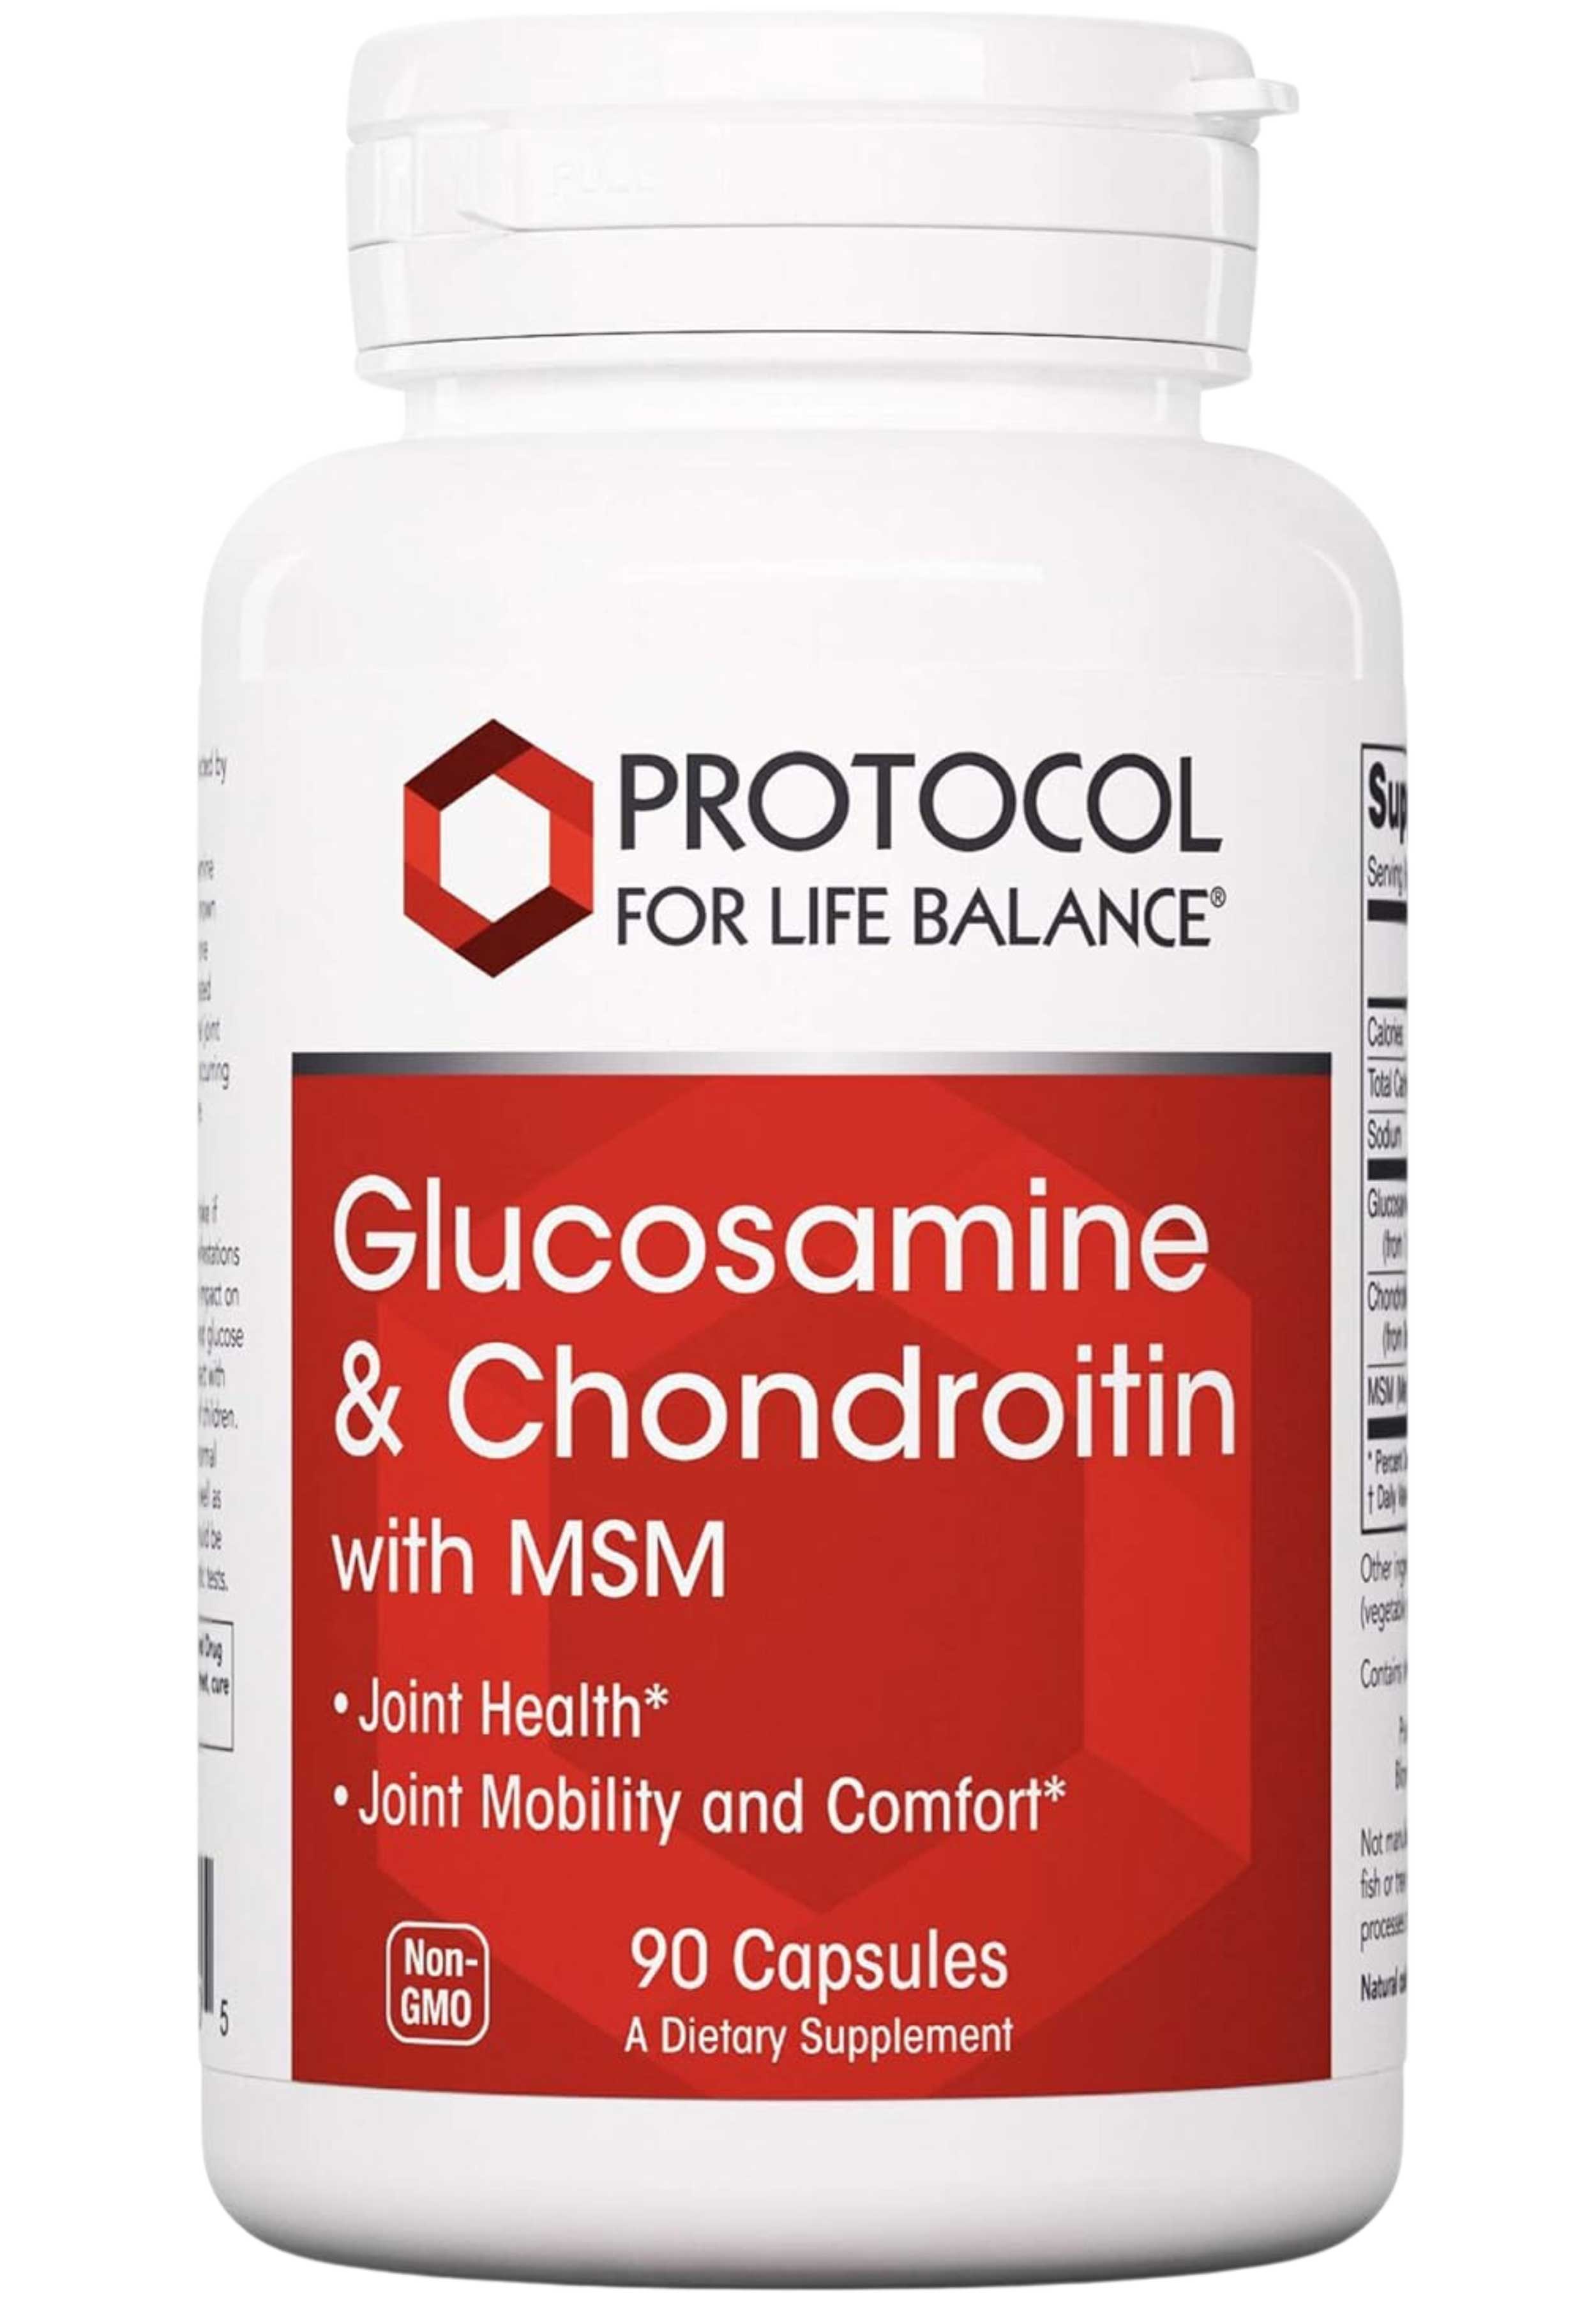 Protocol for Life Balance Glucosamine & Chondroitin with MSM